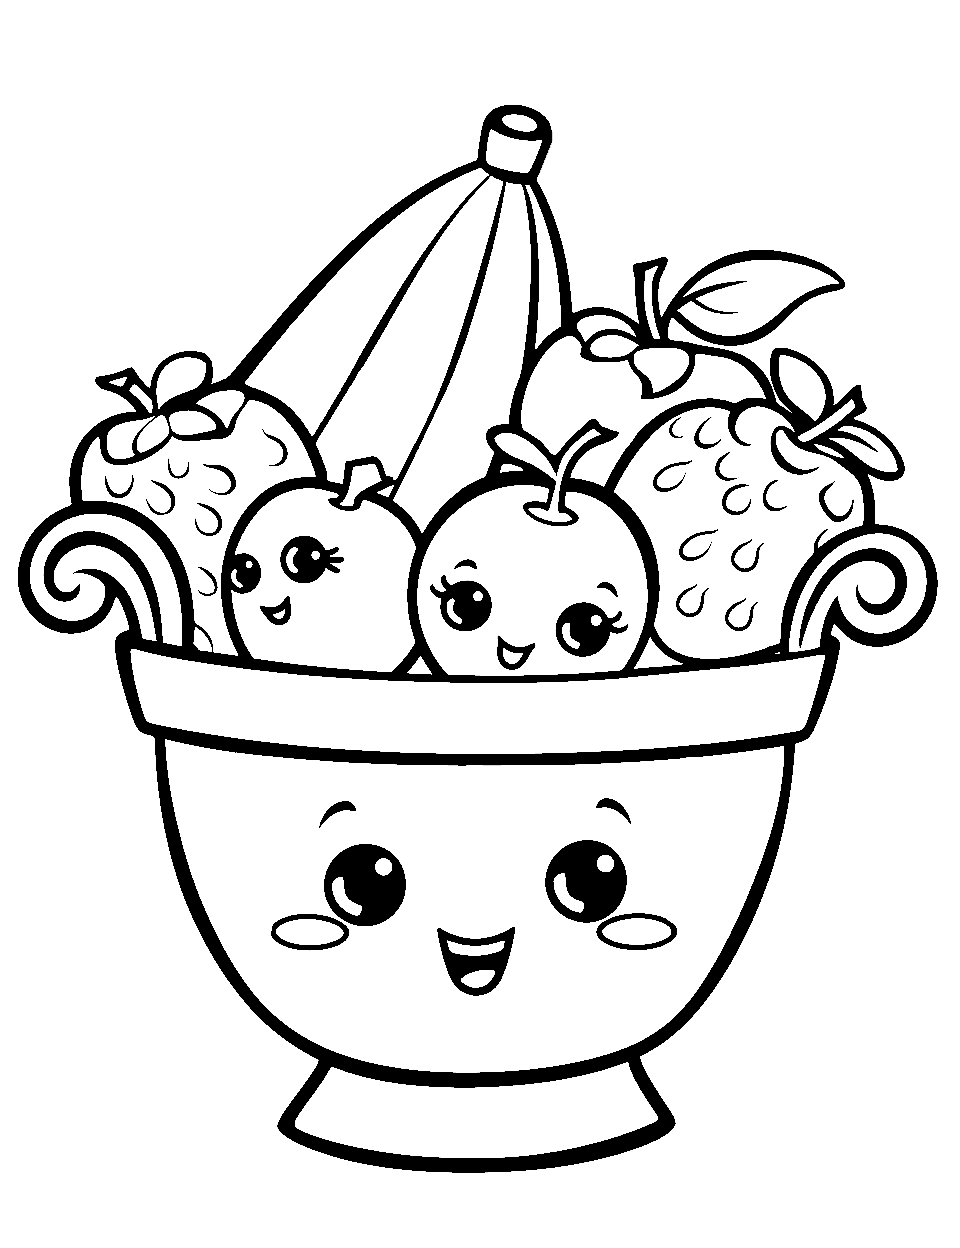 20+ Free Shopkins Coloring Pages